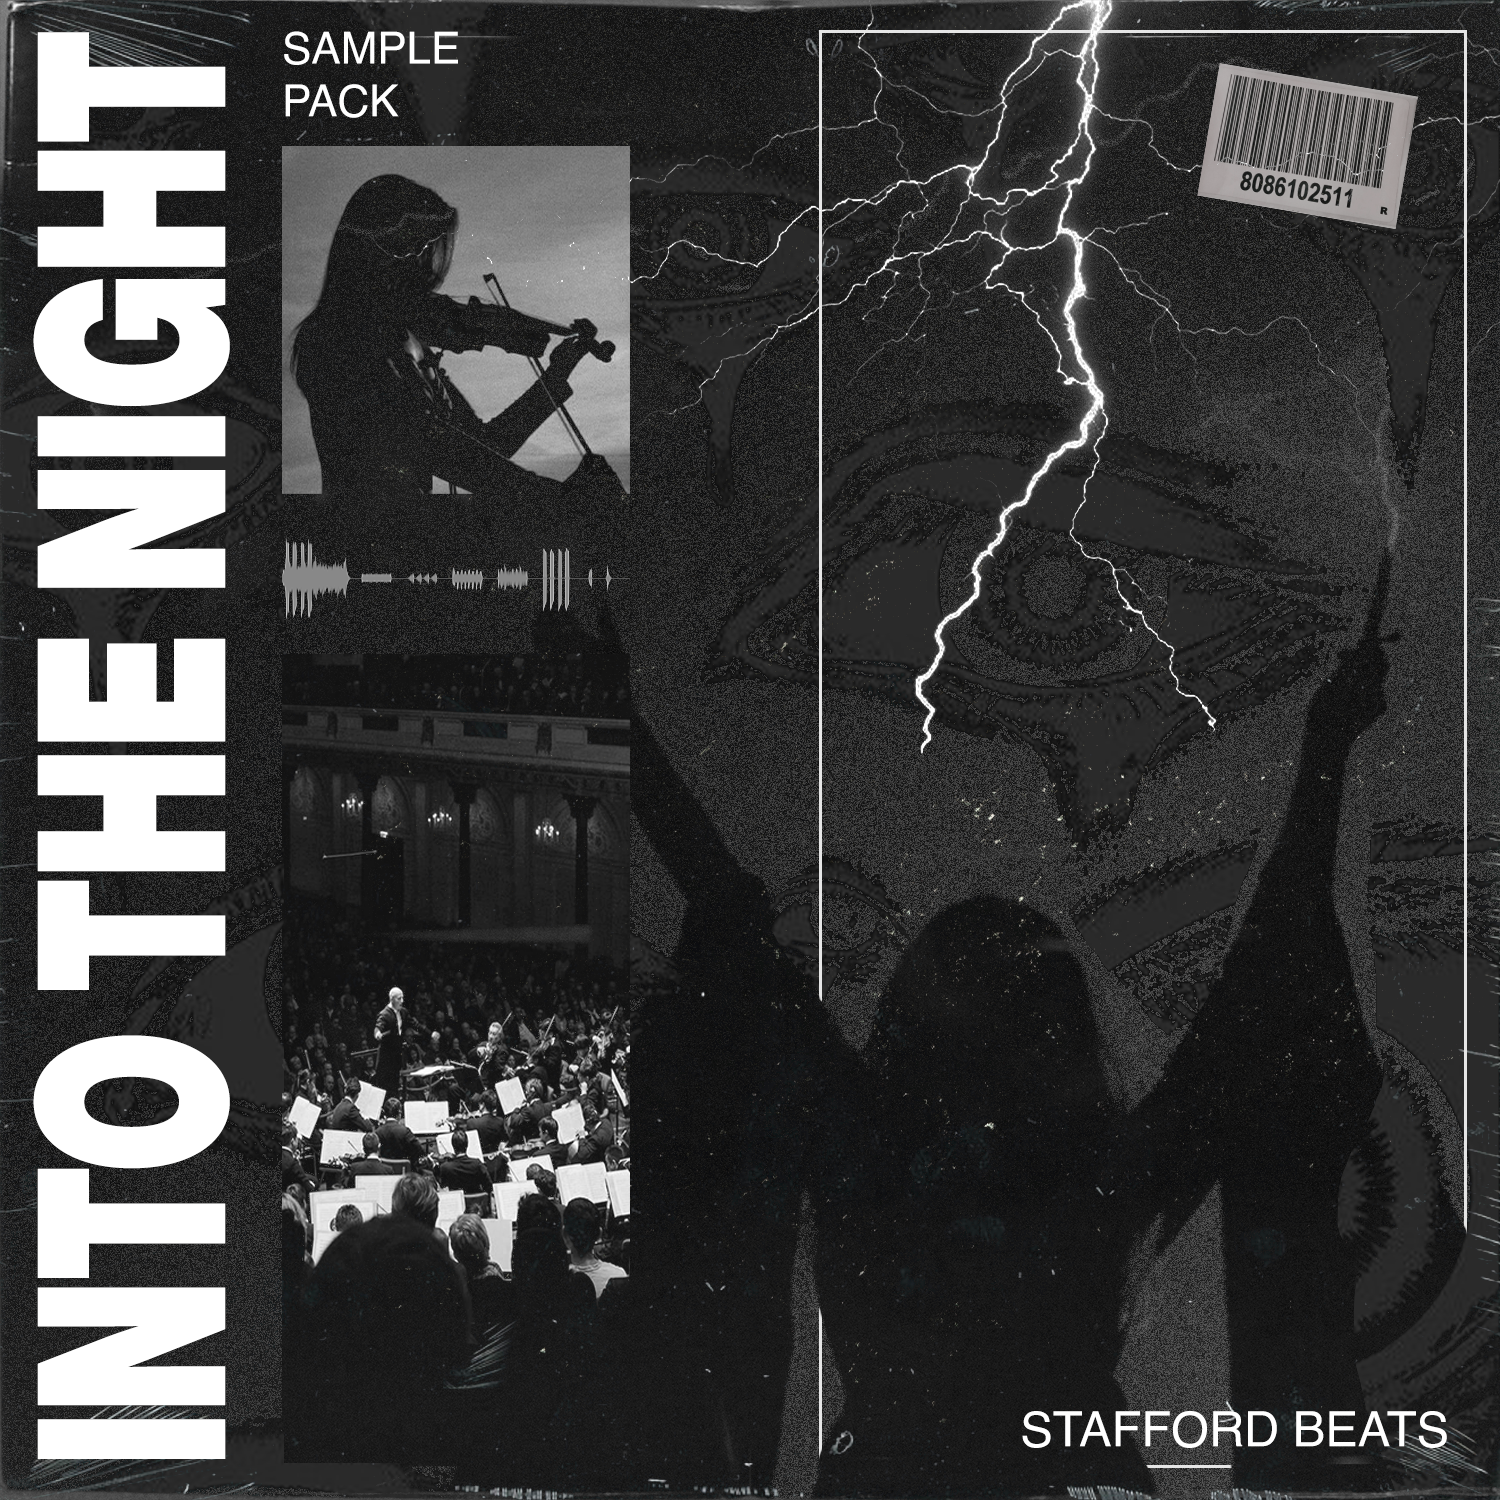 Into The Night Sample Pack [Violin, Lil Baby, Future]